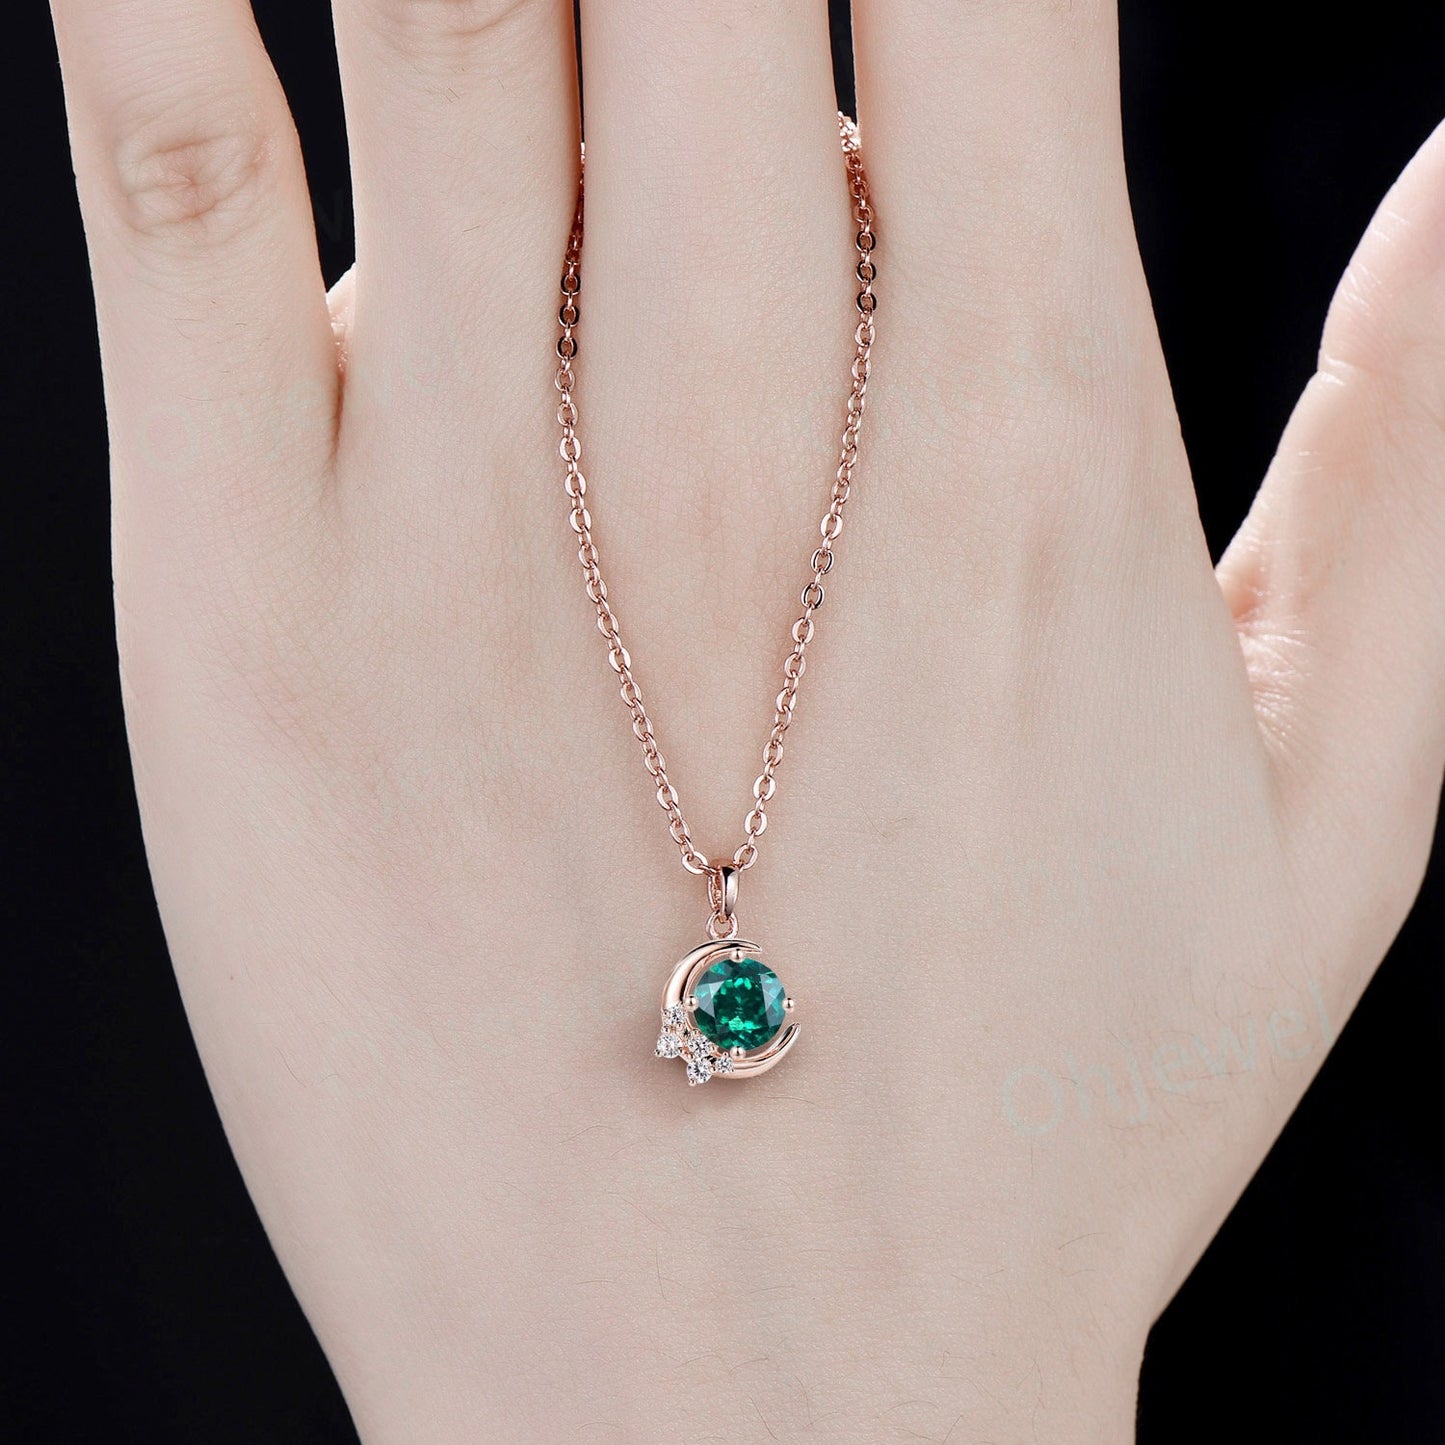 1ct Round green emerald necklace solid 14k rose gold unique moon necklace cluster moissanite Pendant women May birthstone anniversary gift